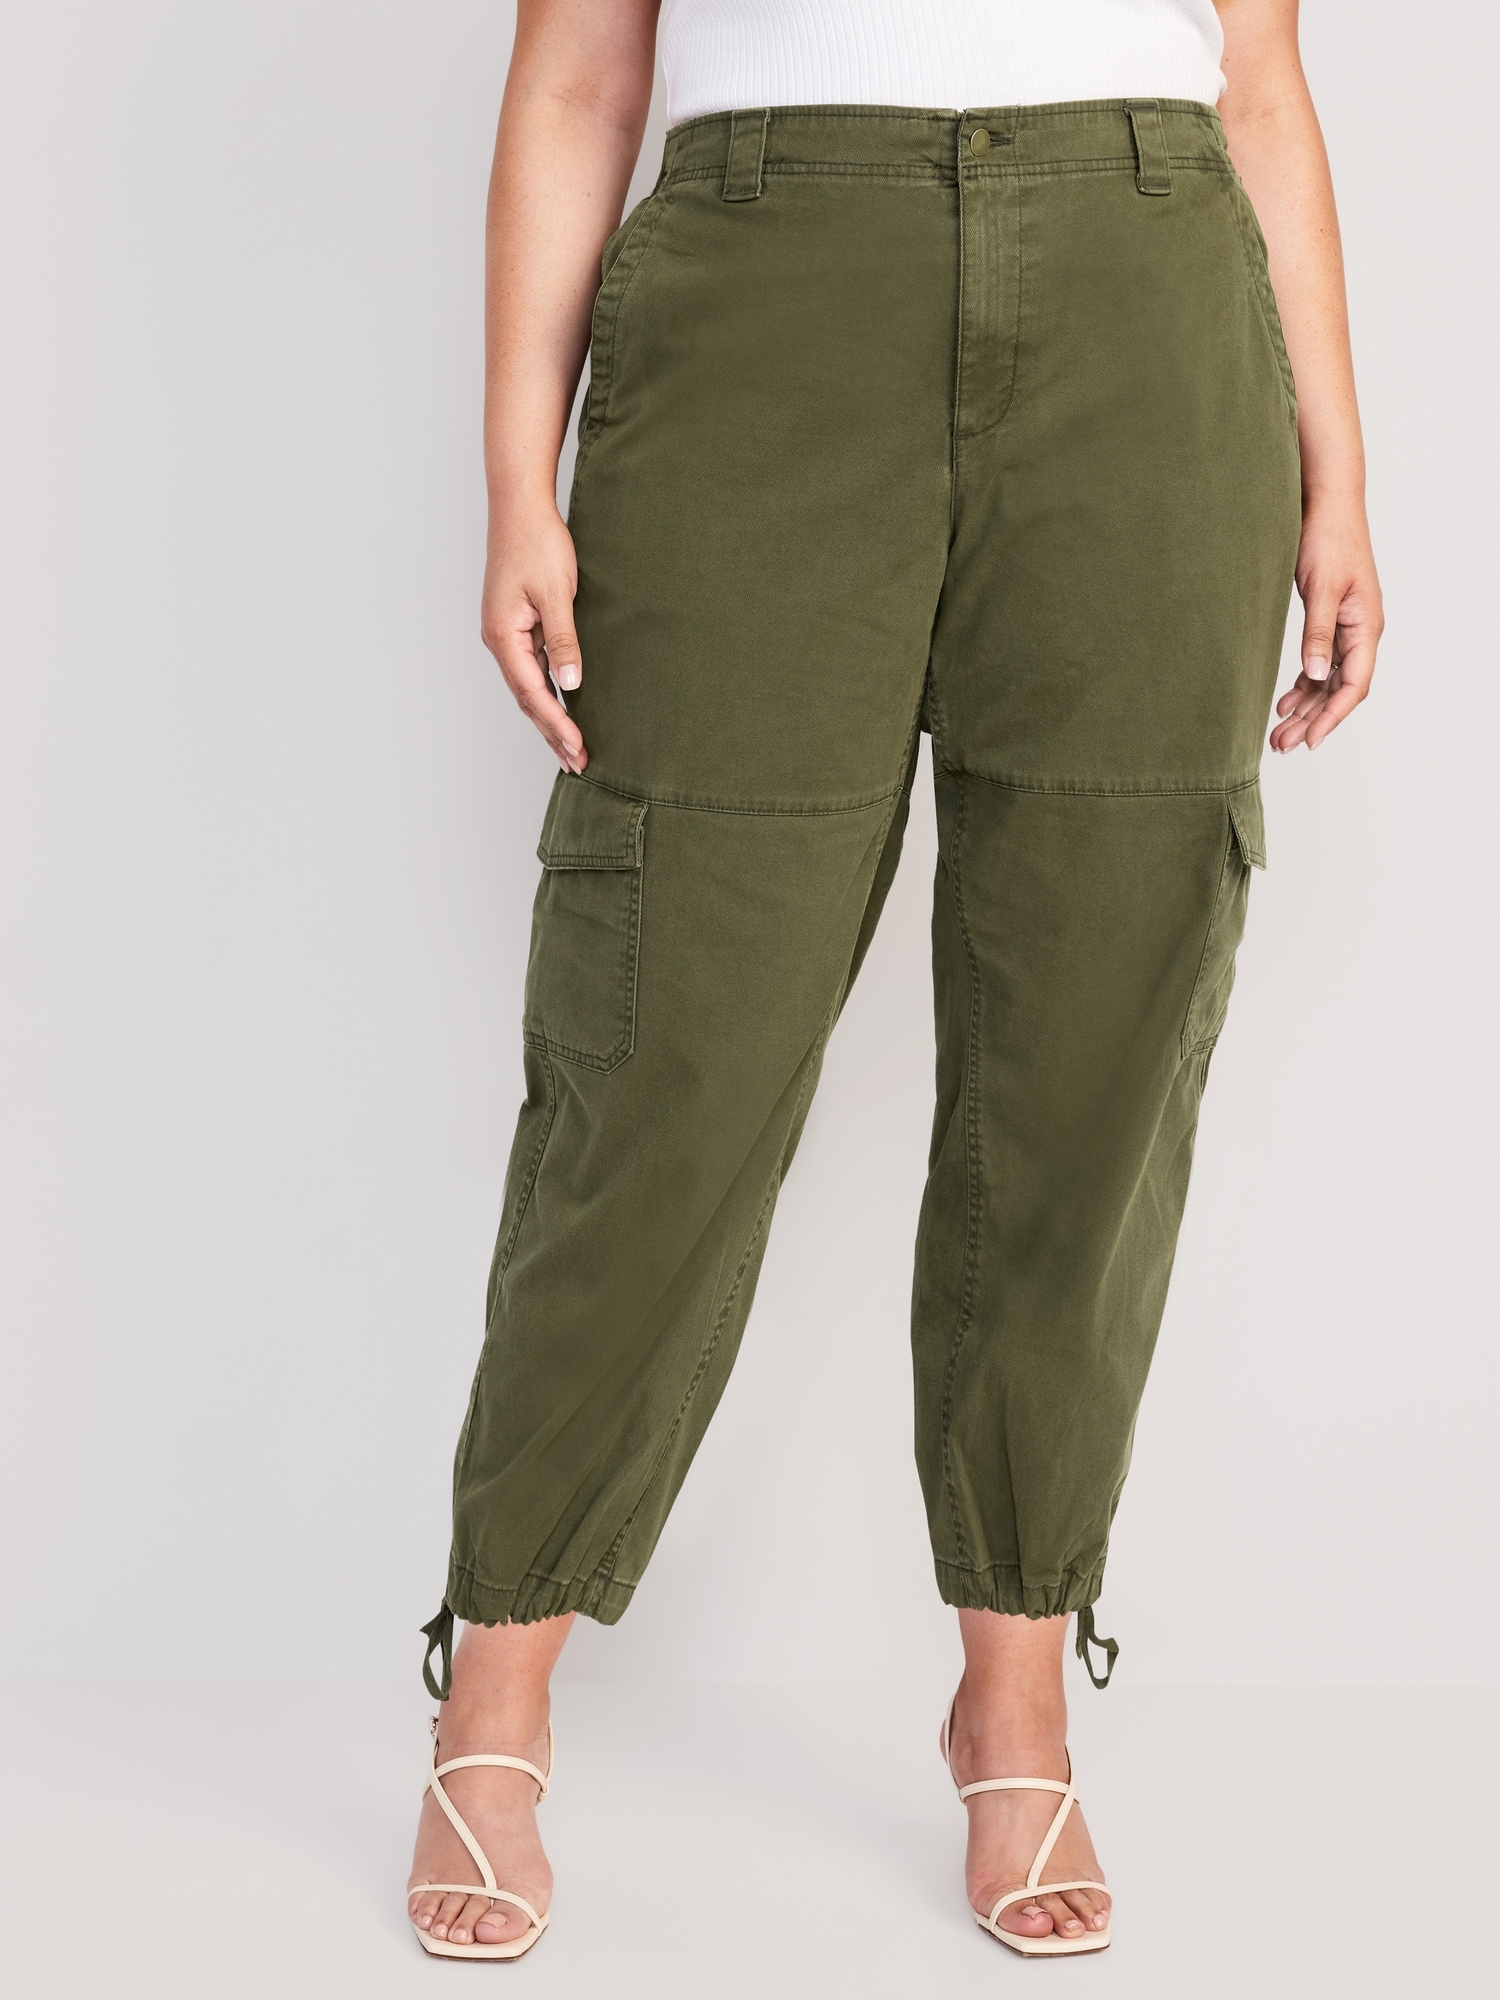  Cargo Pants Women Plus Size high Waisted Baggy Petite